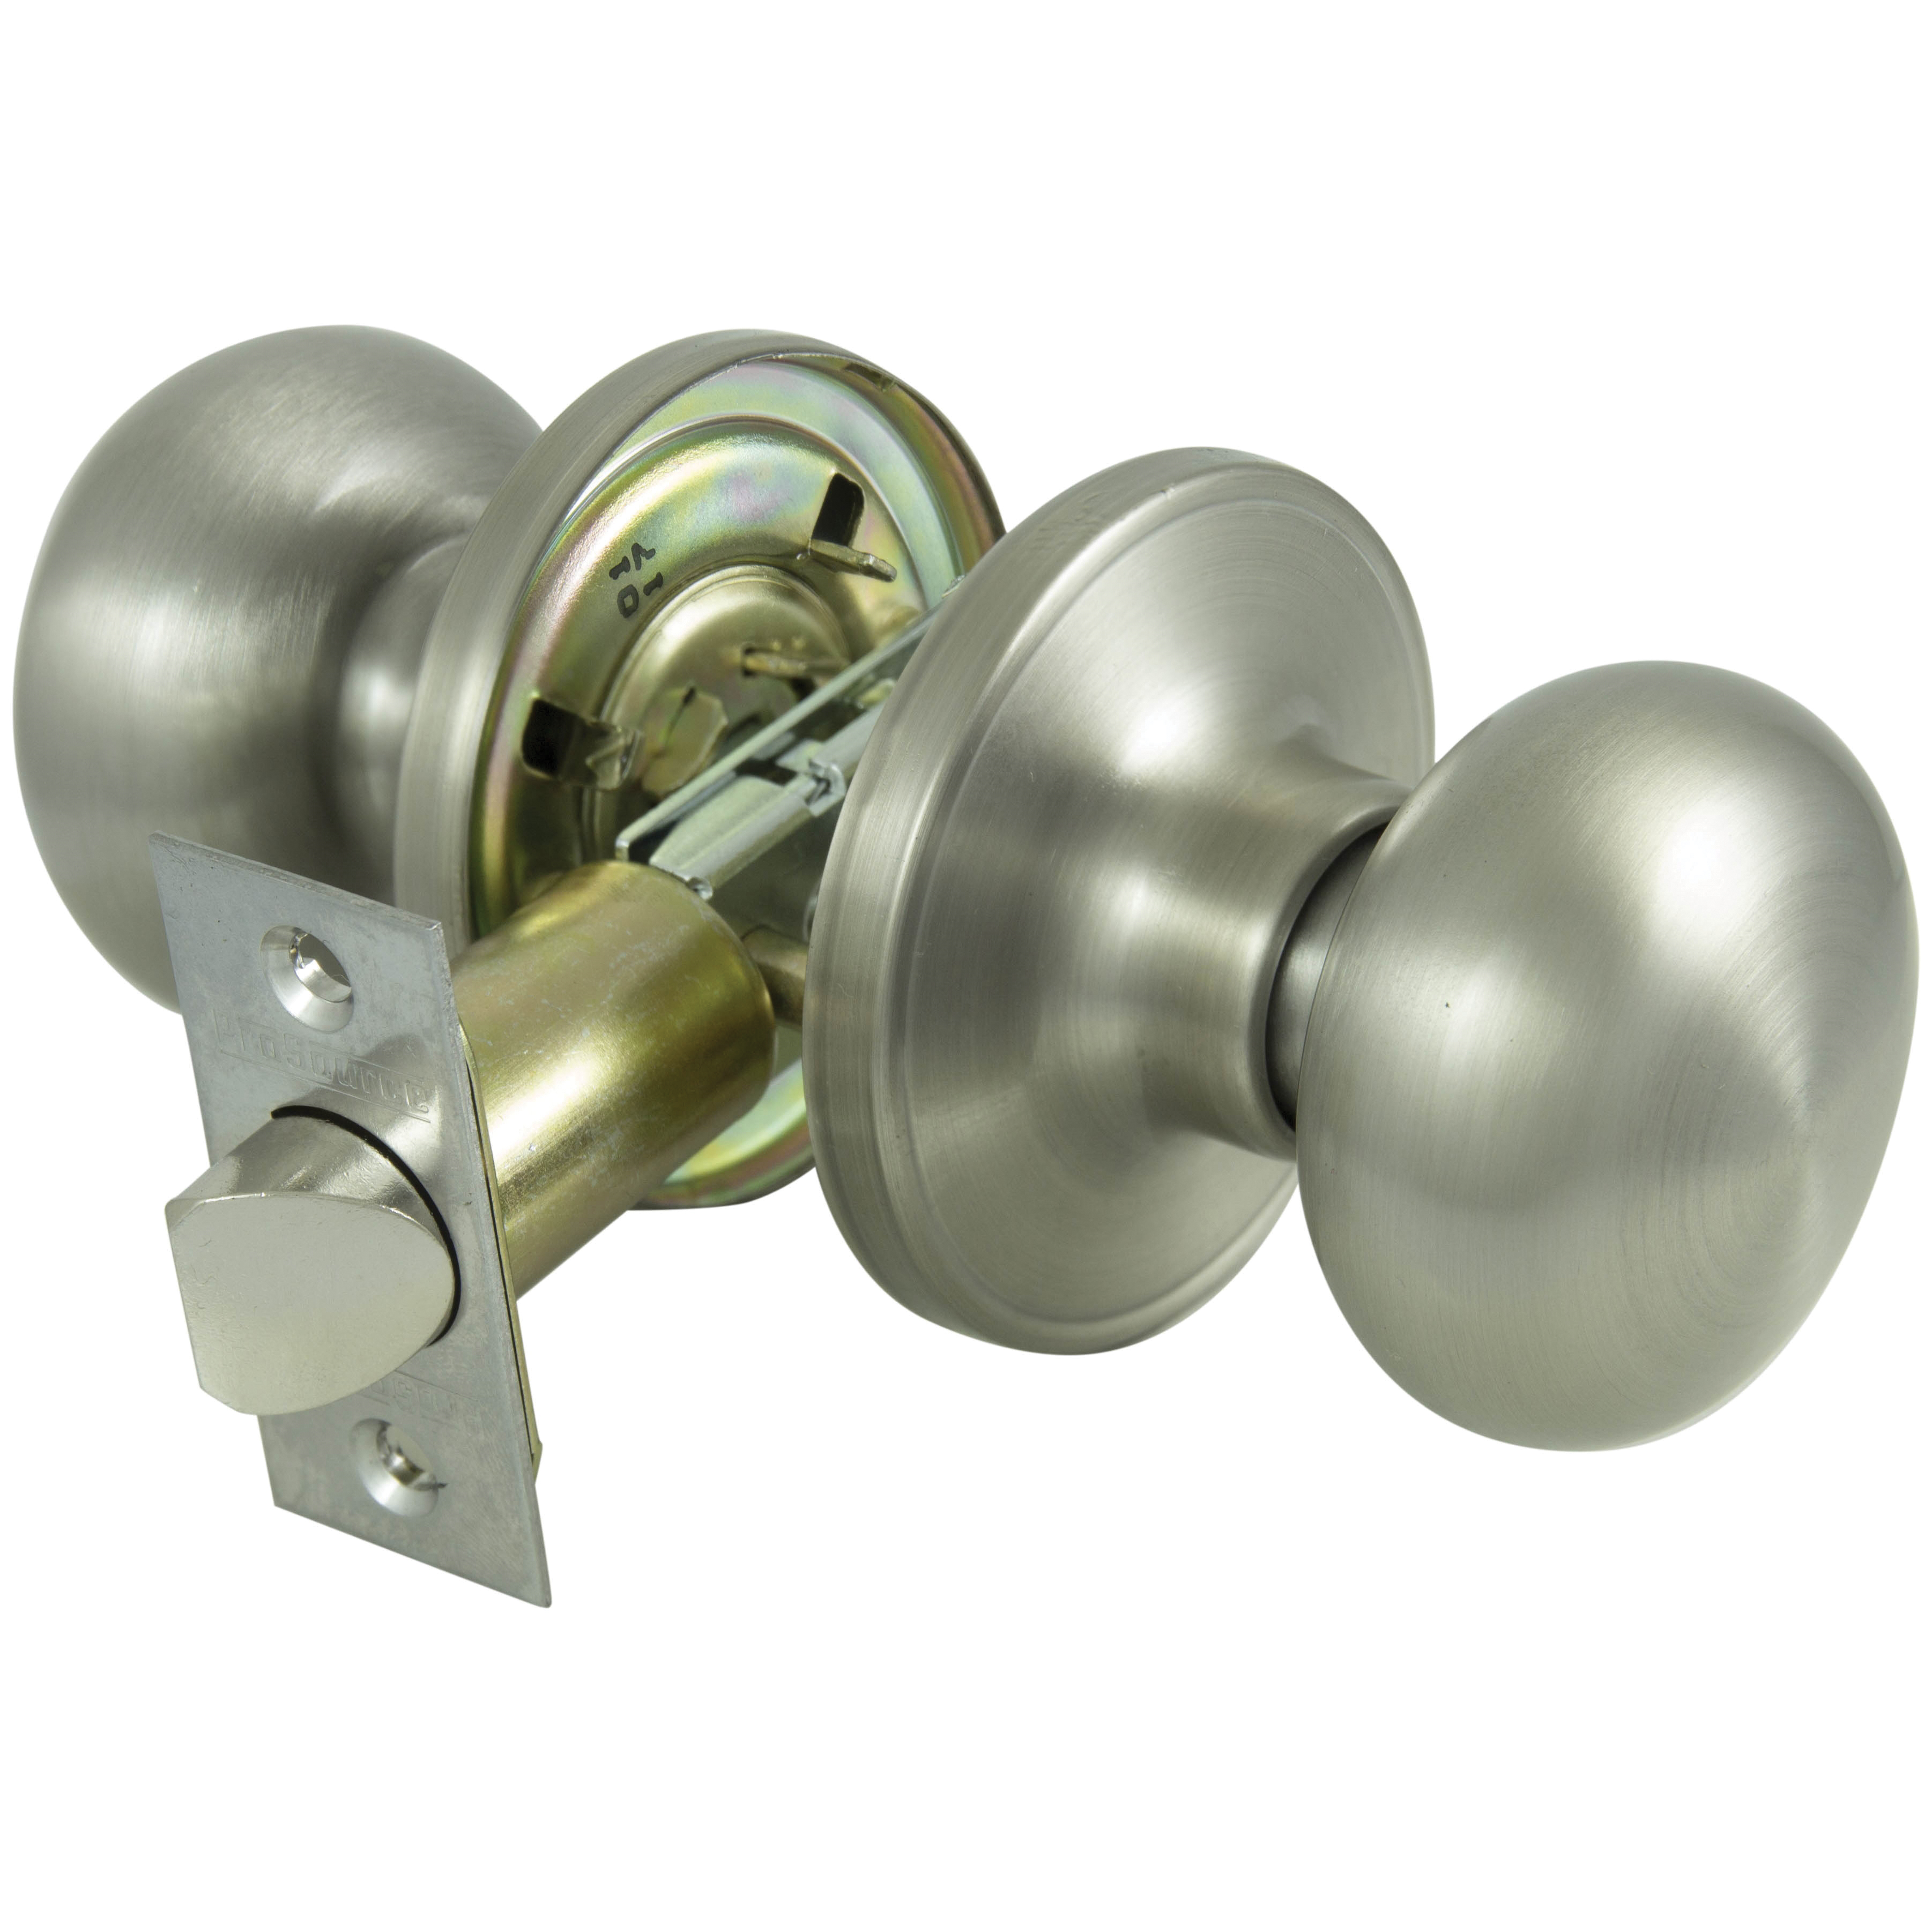 TFX230V-PS Passage Knob, Metal, Satin Nickel, 2-3/8 to 2-3/4 in Backset, 1-3/8 to 1-3/4 in Thick Door